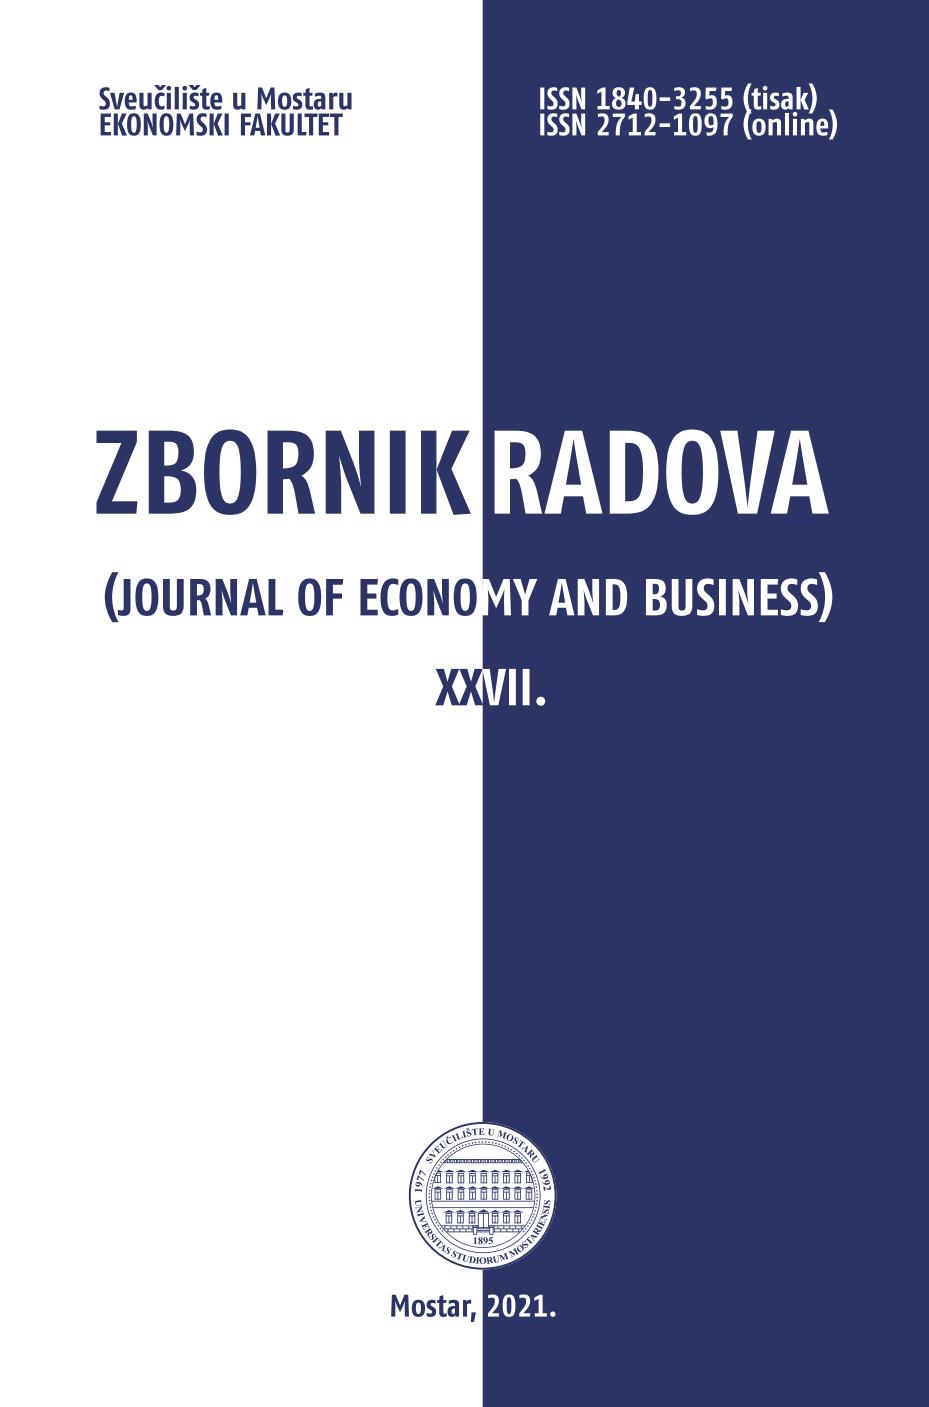 IMPACT OF BRAND AWARENESS, PERCEIVED QUALITY AND DIGITAL MARKETING EFFORTS ON BRAND EQUITY: EMPIRICAL STUDY OF THE CROATIAN COMPANY KATEMA Cover Image